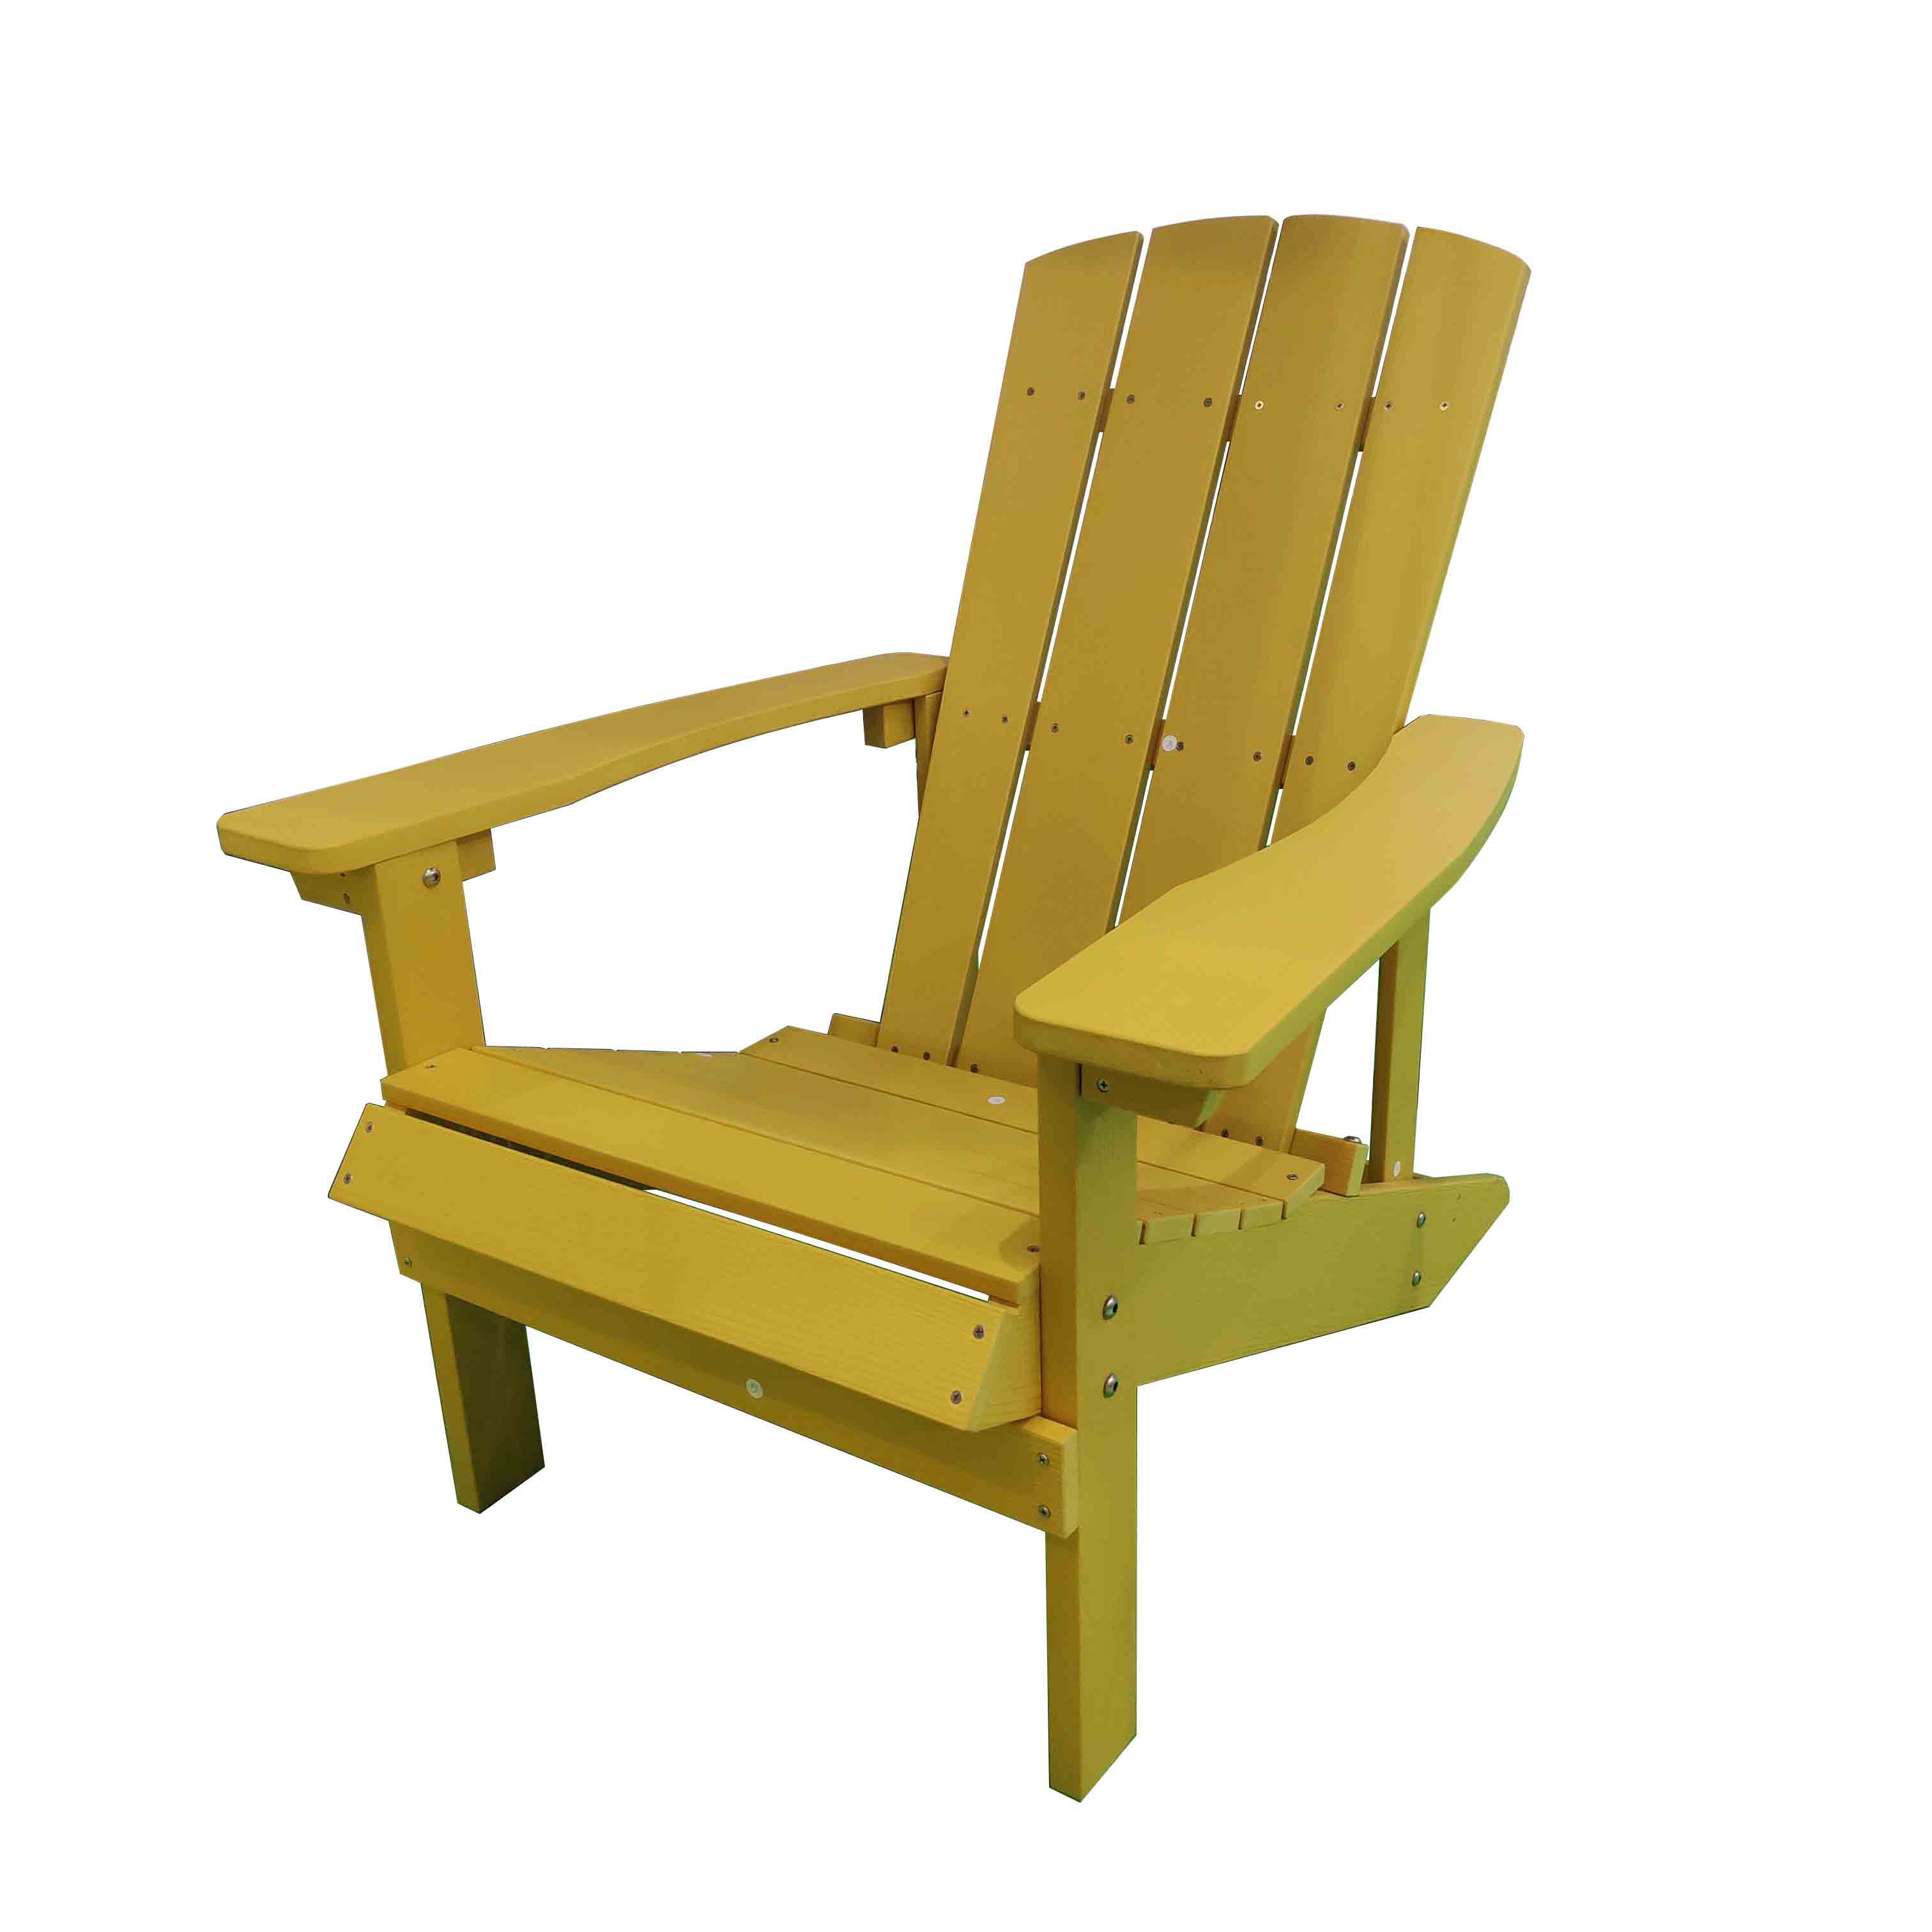 Best Cheap Synthetic Rattan Chair Factories - JJ-C14501-YLW-GG PS wood Adirondack chair – Jin-jiang Industry